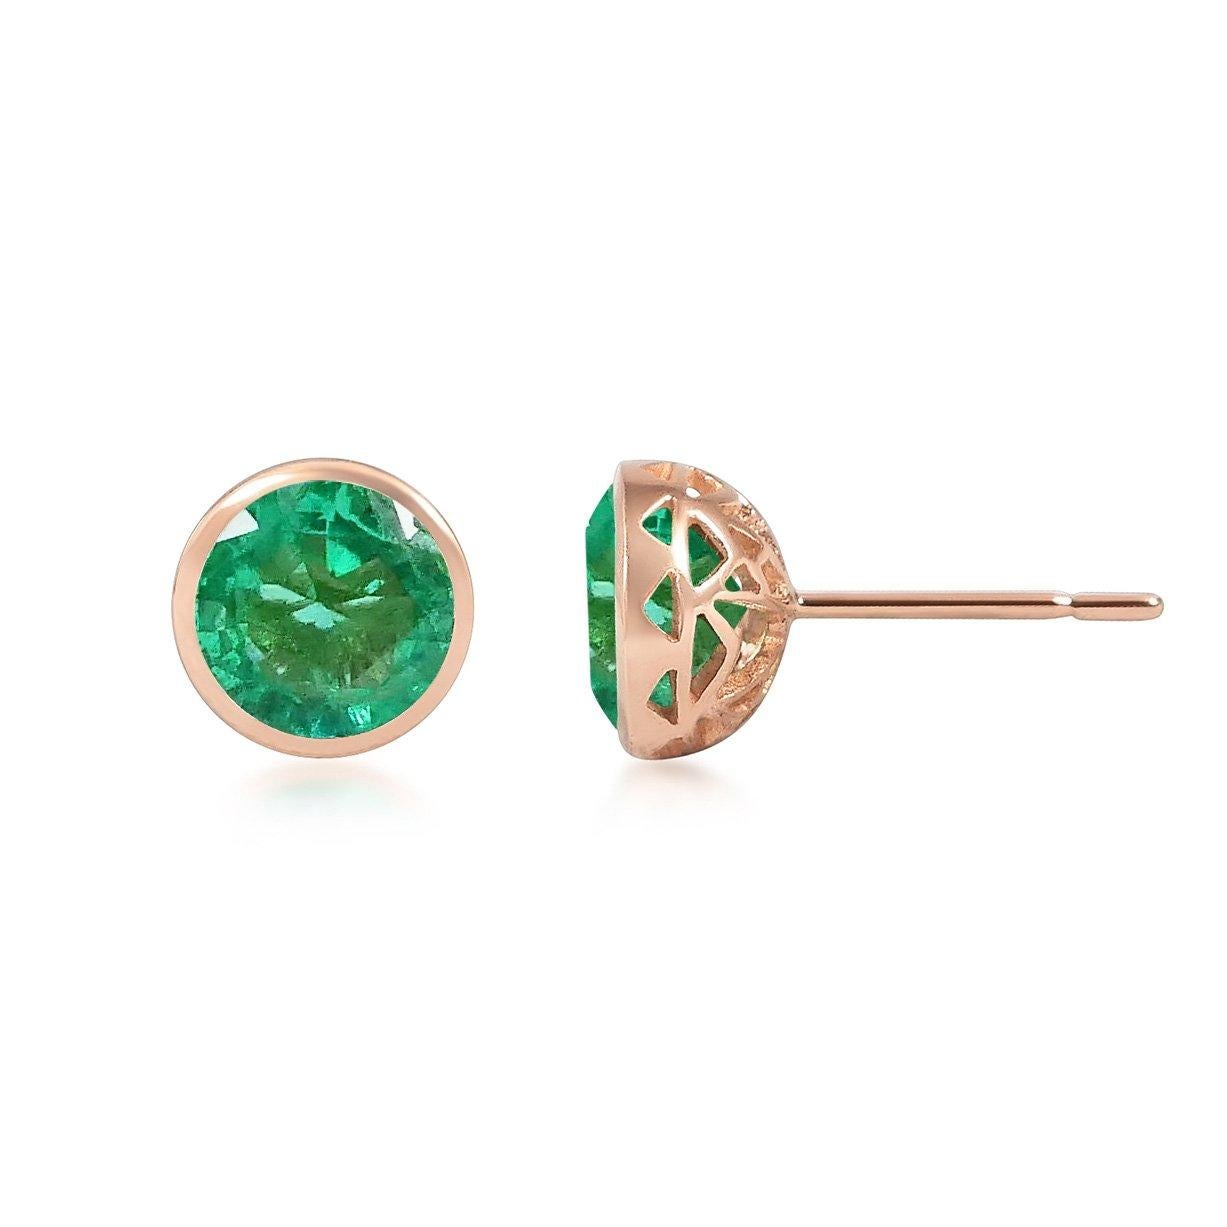 Handcrafted 2.00 Carats Emerald 18 Karat Rose Gold Stud Earrings. The 8mm natural stones are set in our iconic hand pierced gold lace to let the light through our precious and fine stones our earrings are the perfect everyday wear.

Emeralds are the